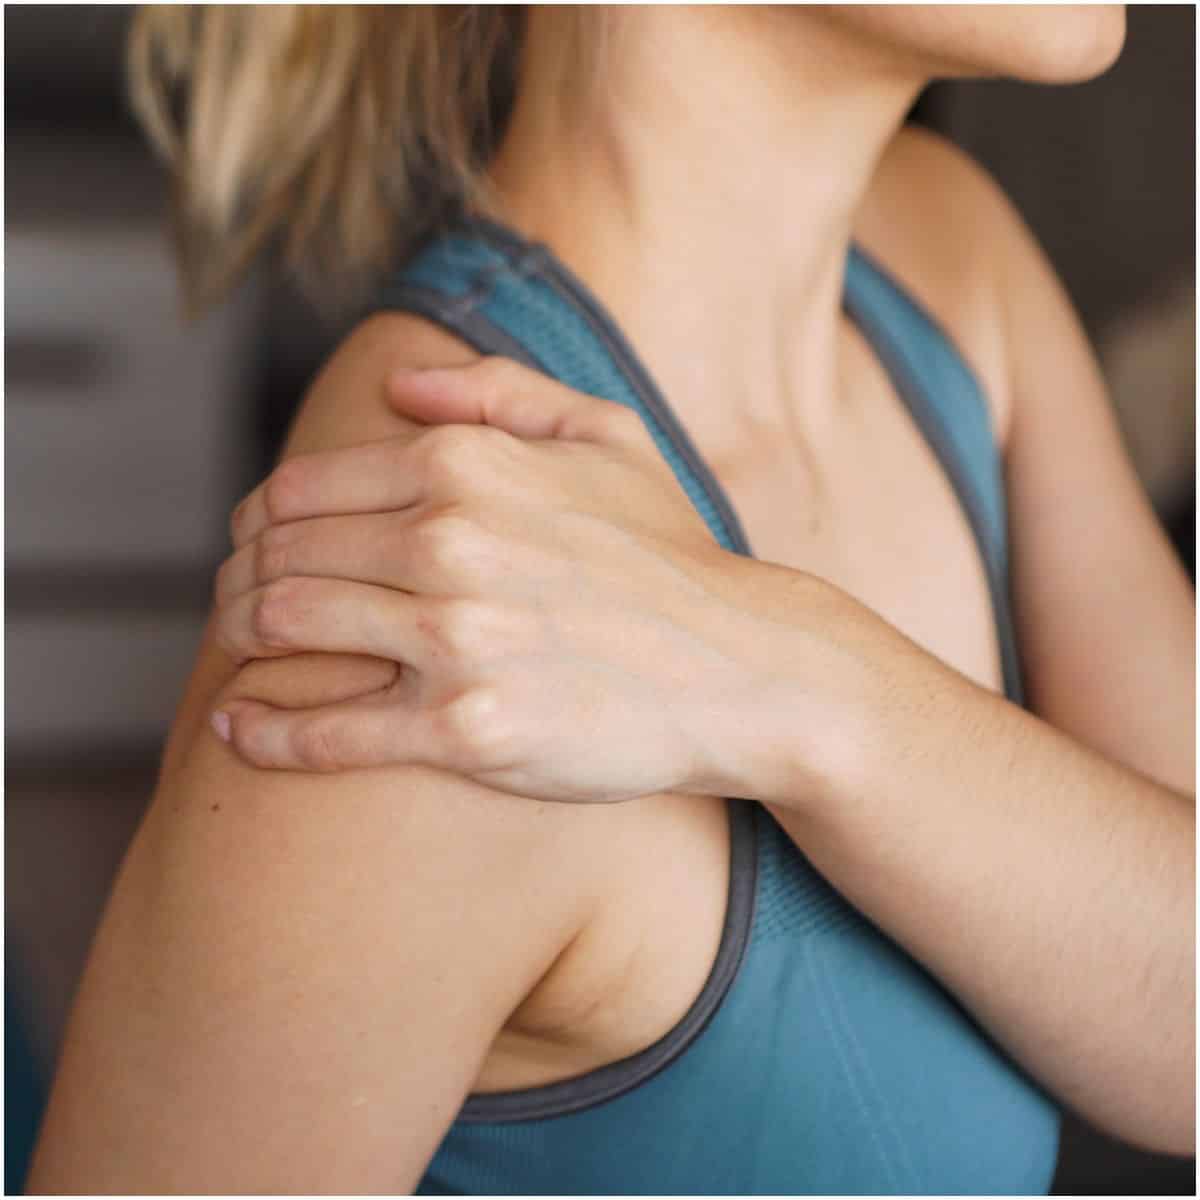 Shoulder and Neck Pain - Spiritual Meaning, Causes, and Prevention